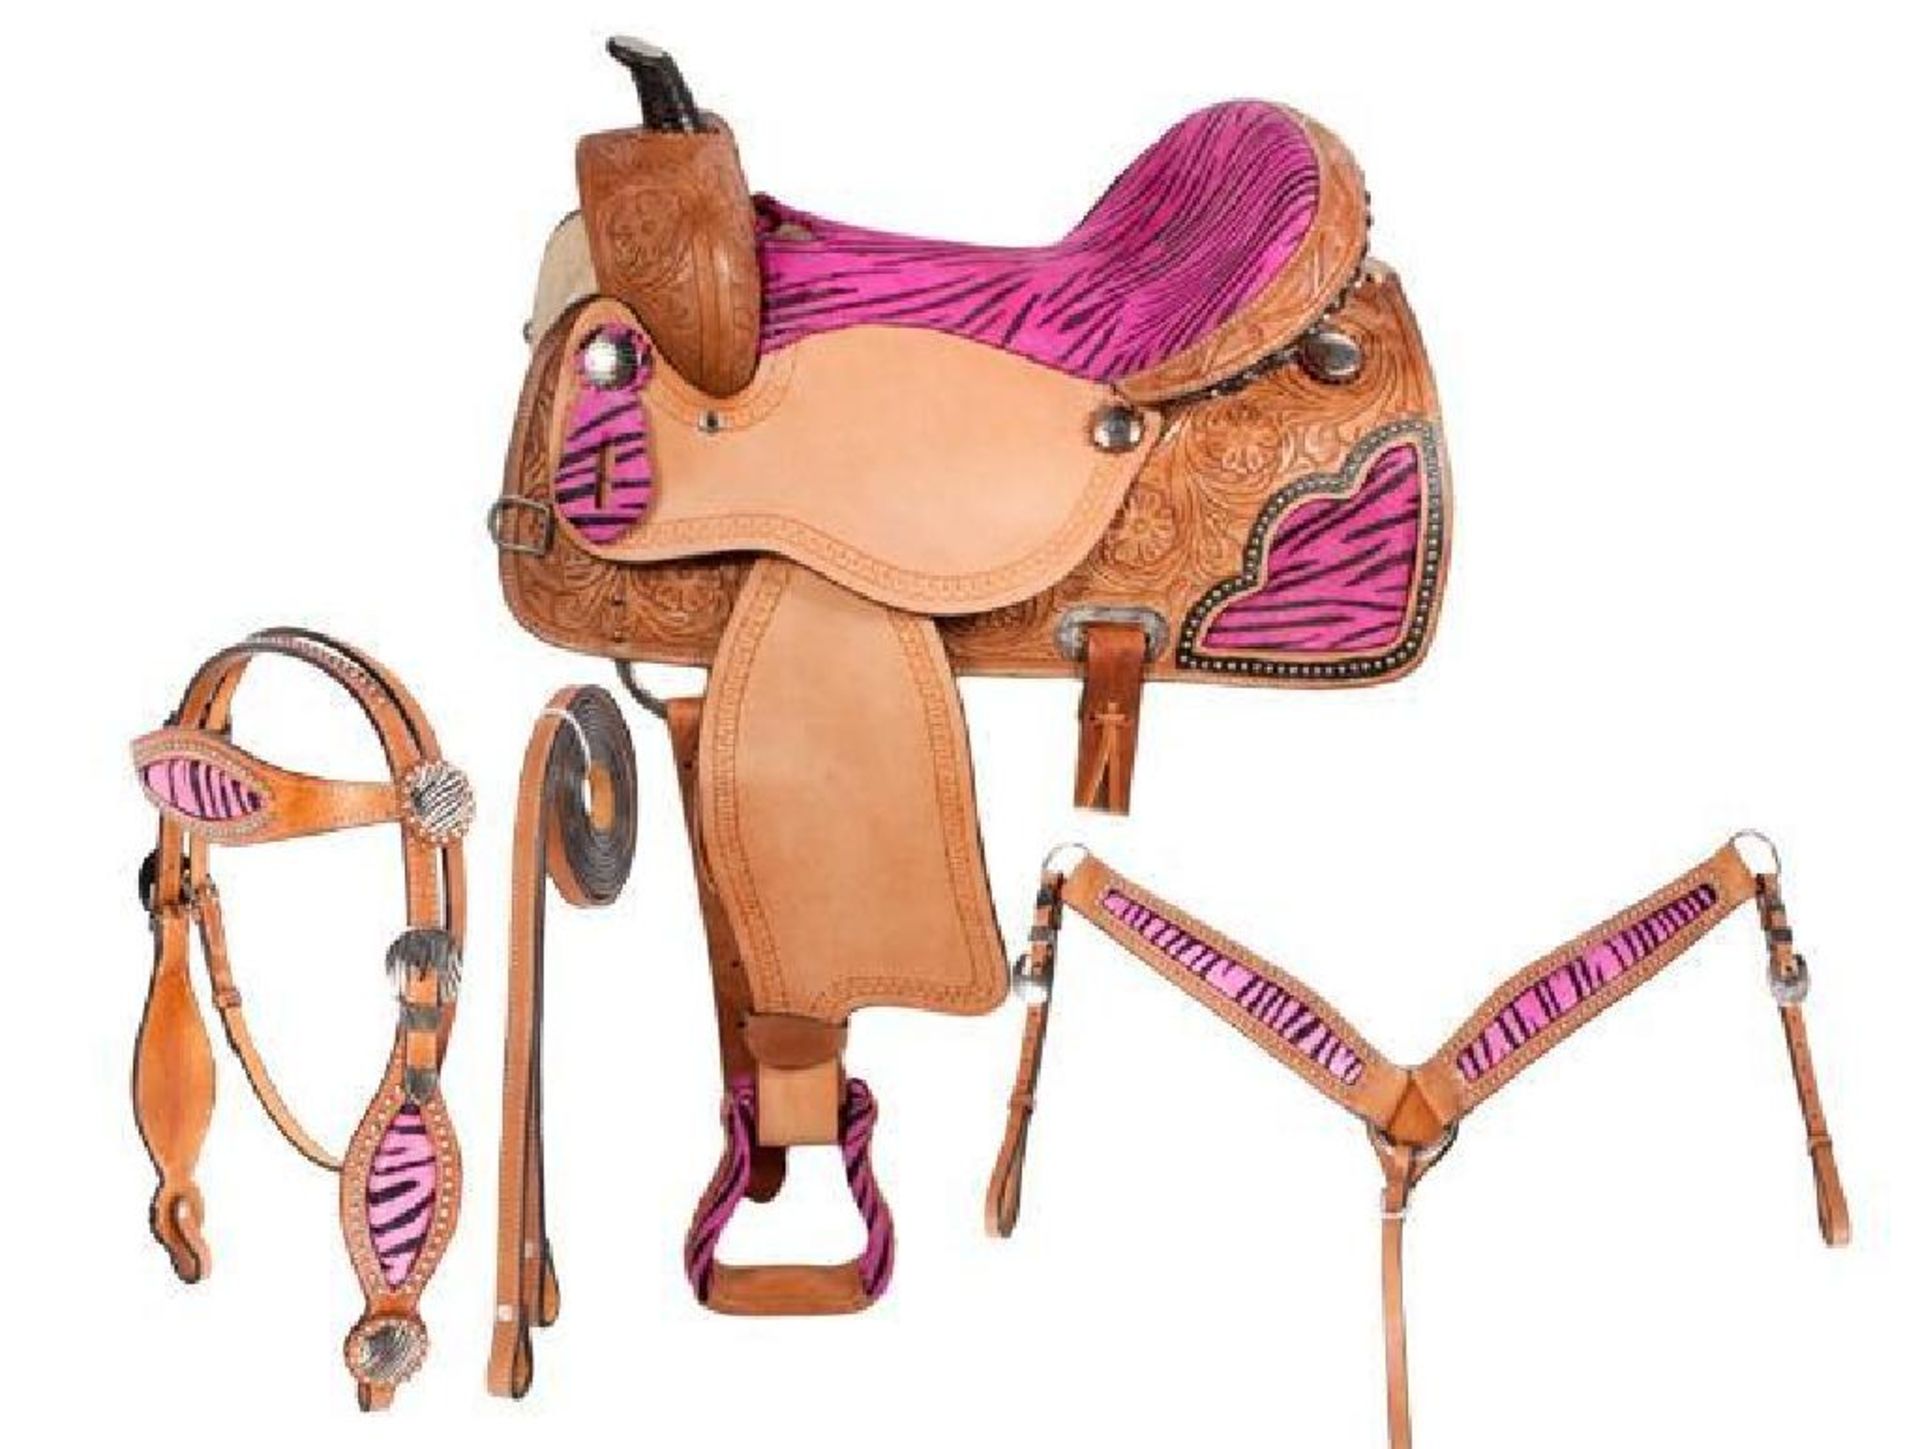 NEW! Pink Zebra Barrel Racing Western Horse Saddle Package 15 16 [6073] FREE SHIPPING!